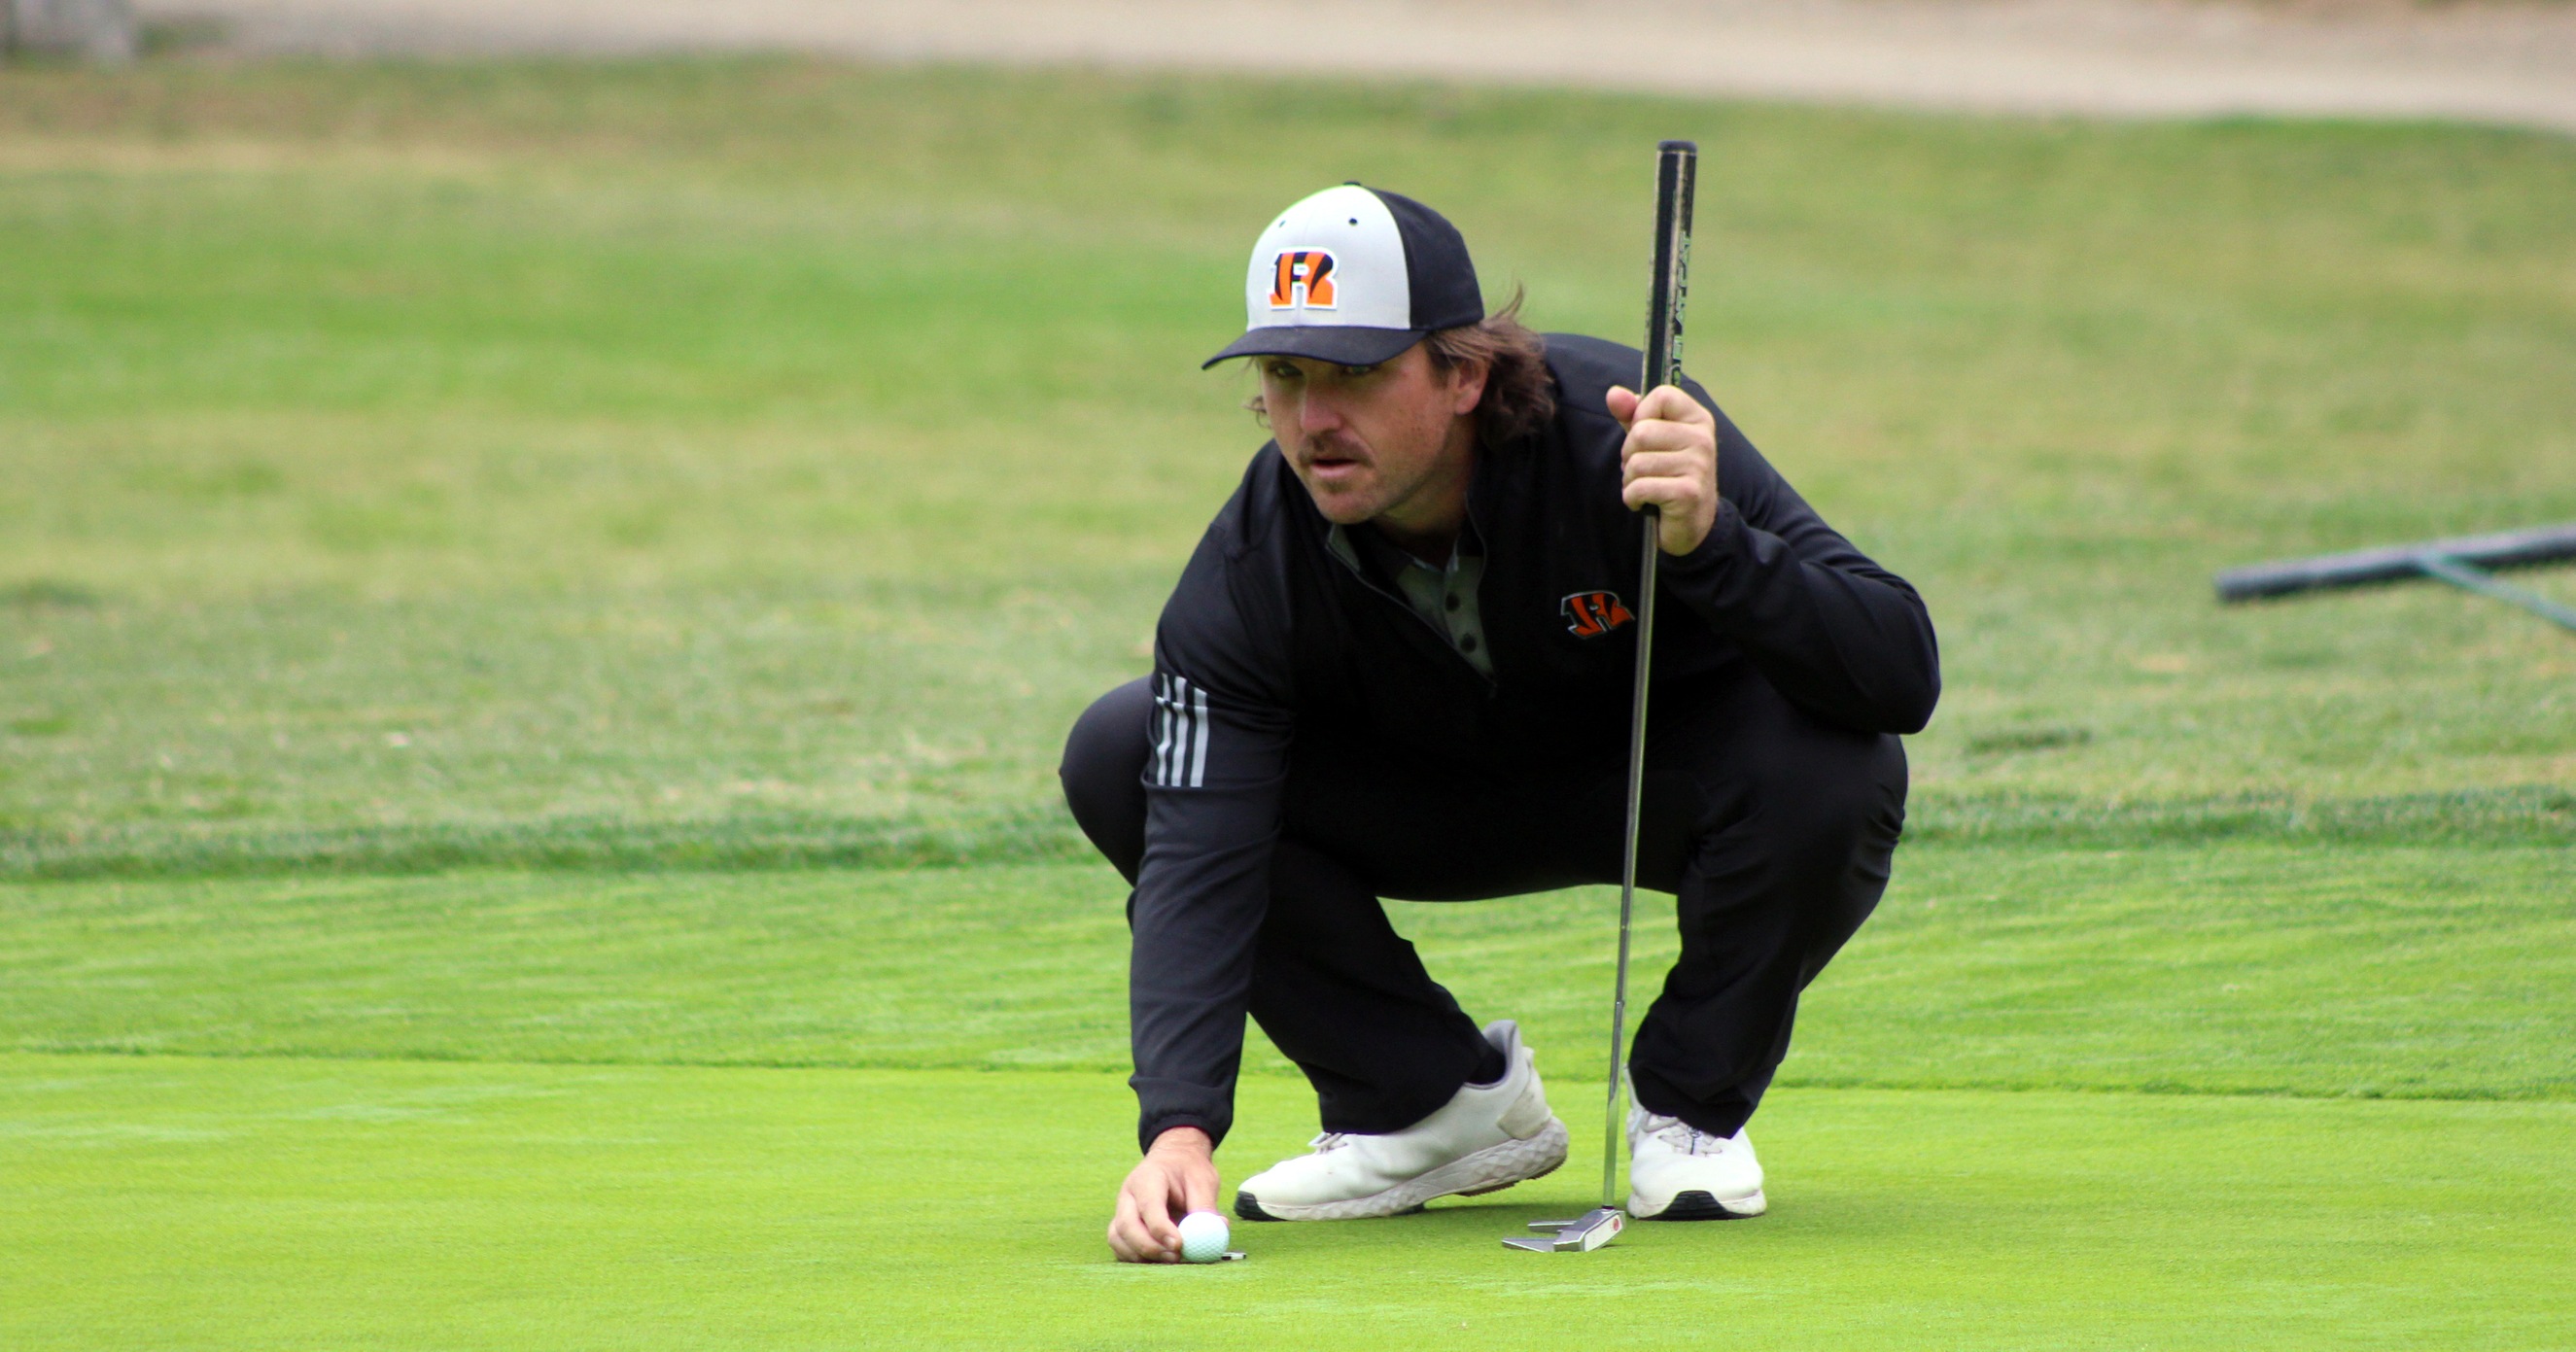 Medlock Wins Second Tournament of the Season, Tigers Finish Four Strokes Out